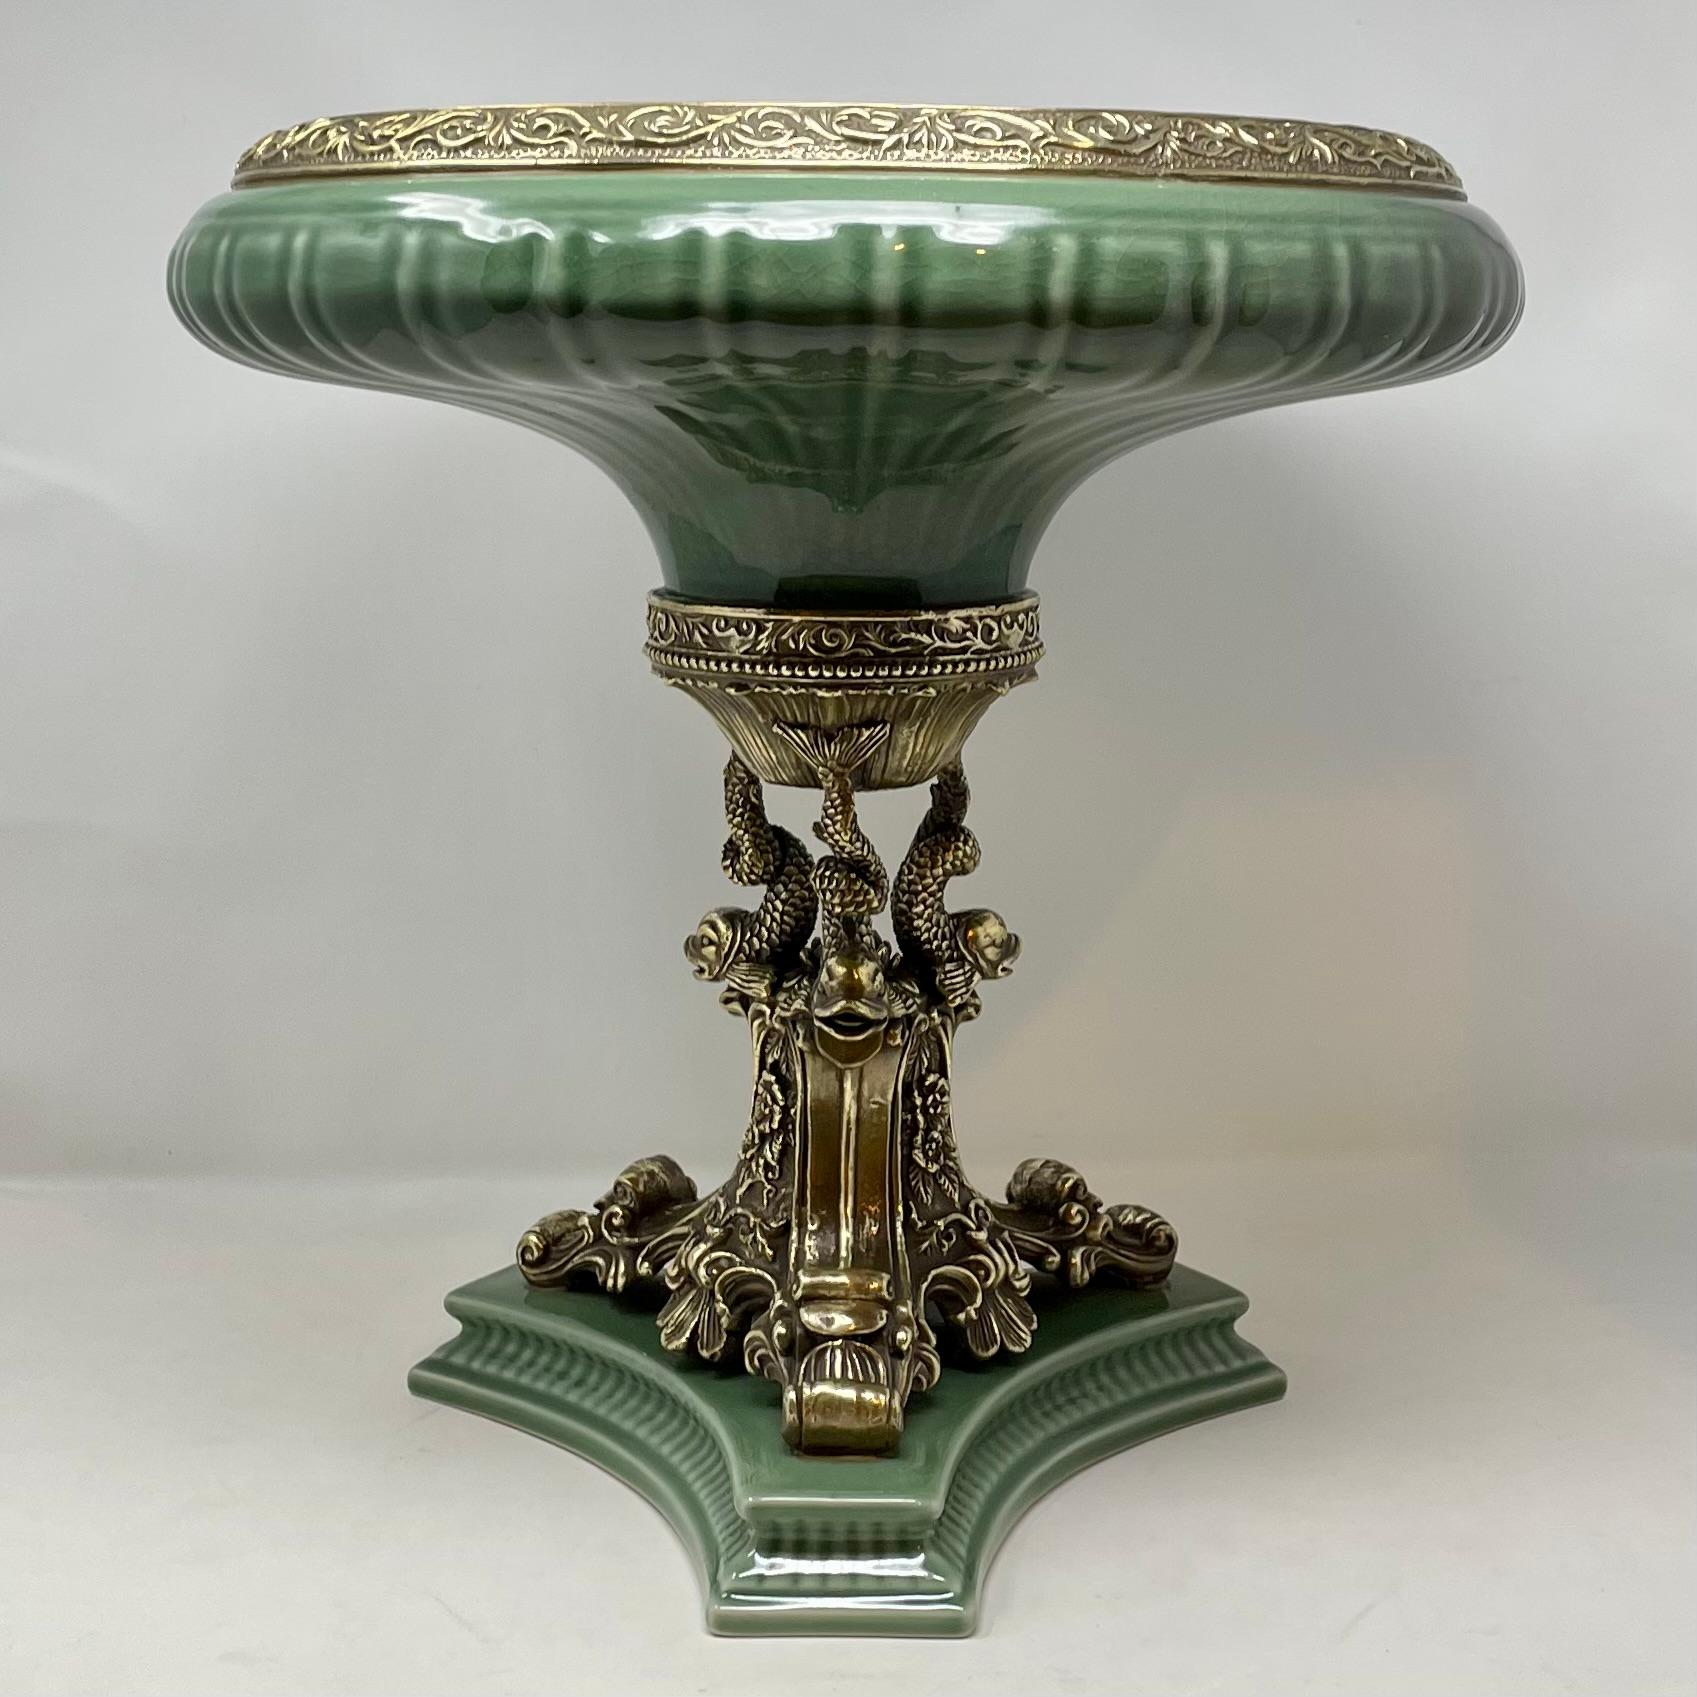 Estate French Neoclassical Sage Green Porcelain Centerpiece with Gold Bronze Mounts.